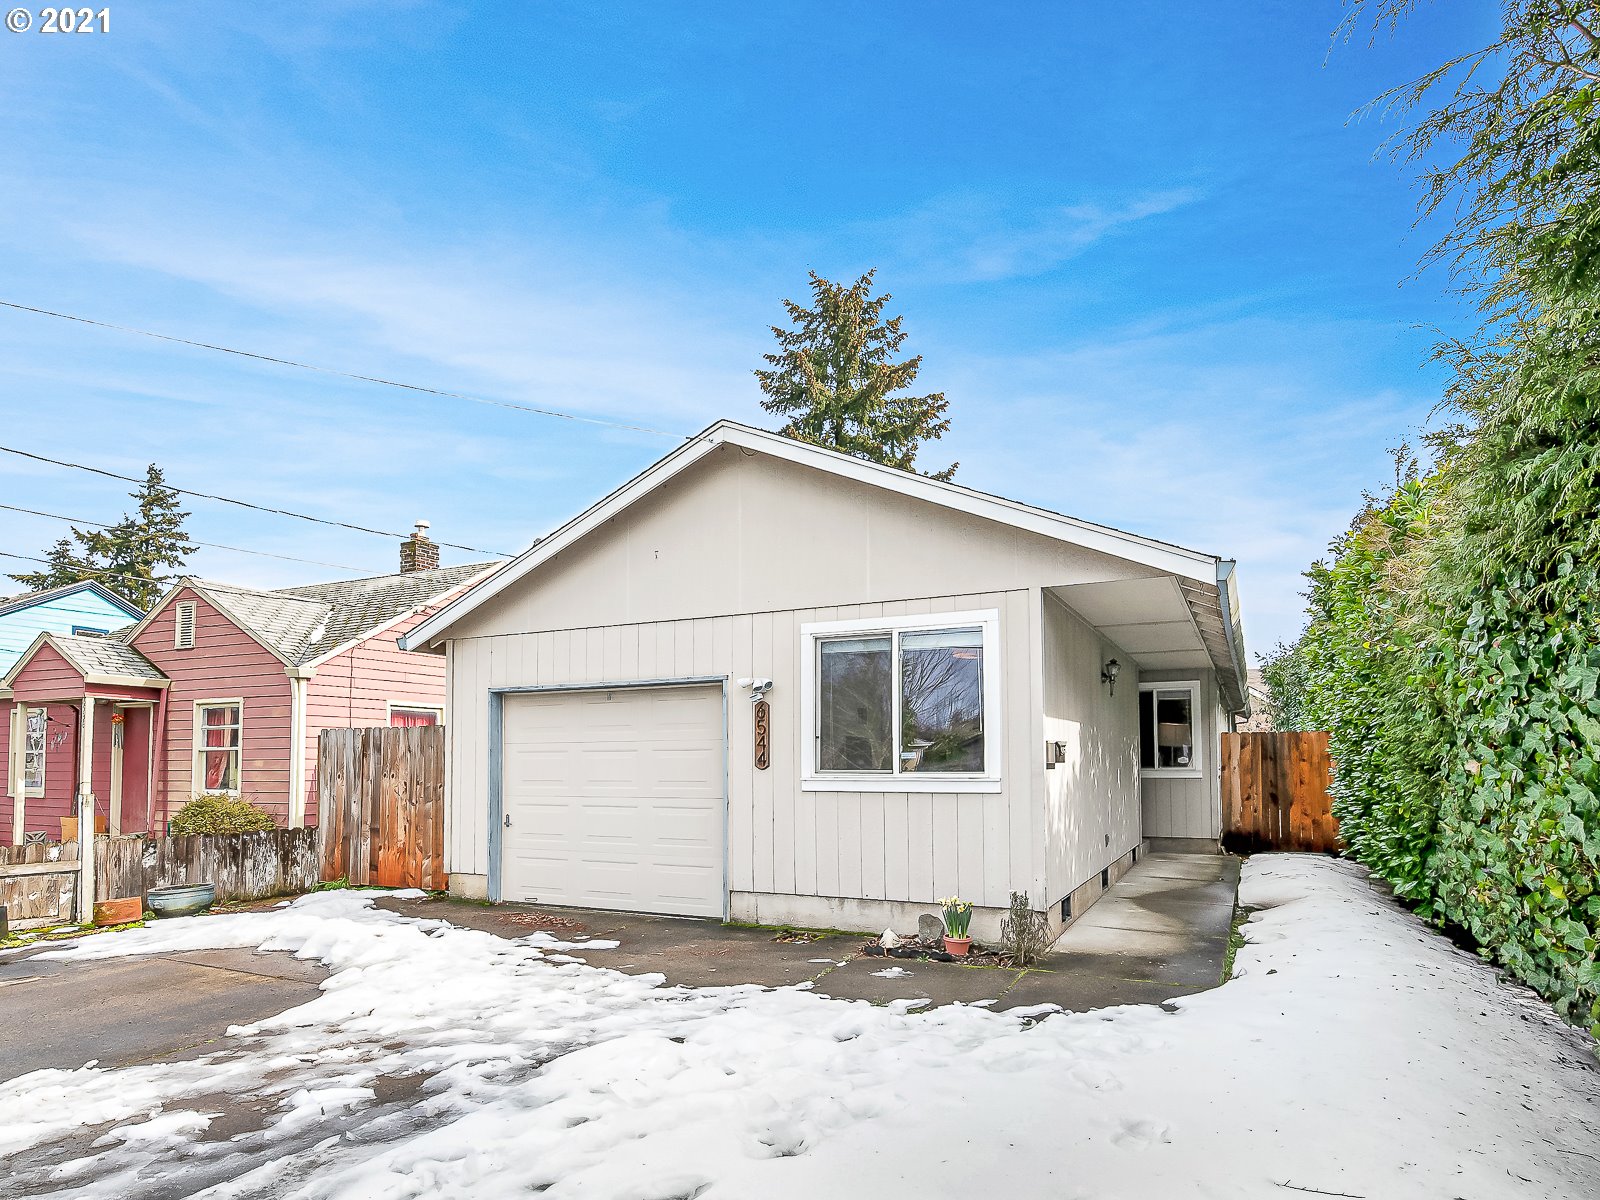 6544 SE 68TH AVE (1 of 24)